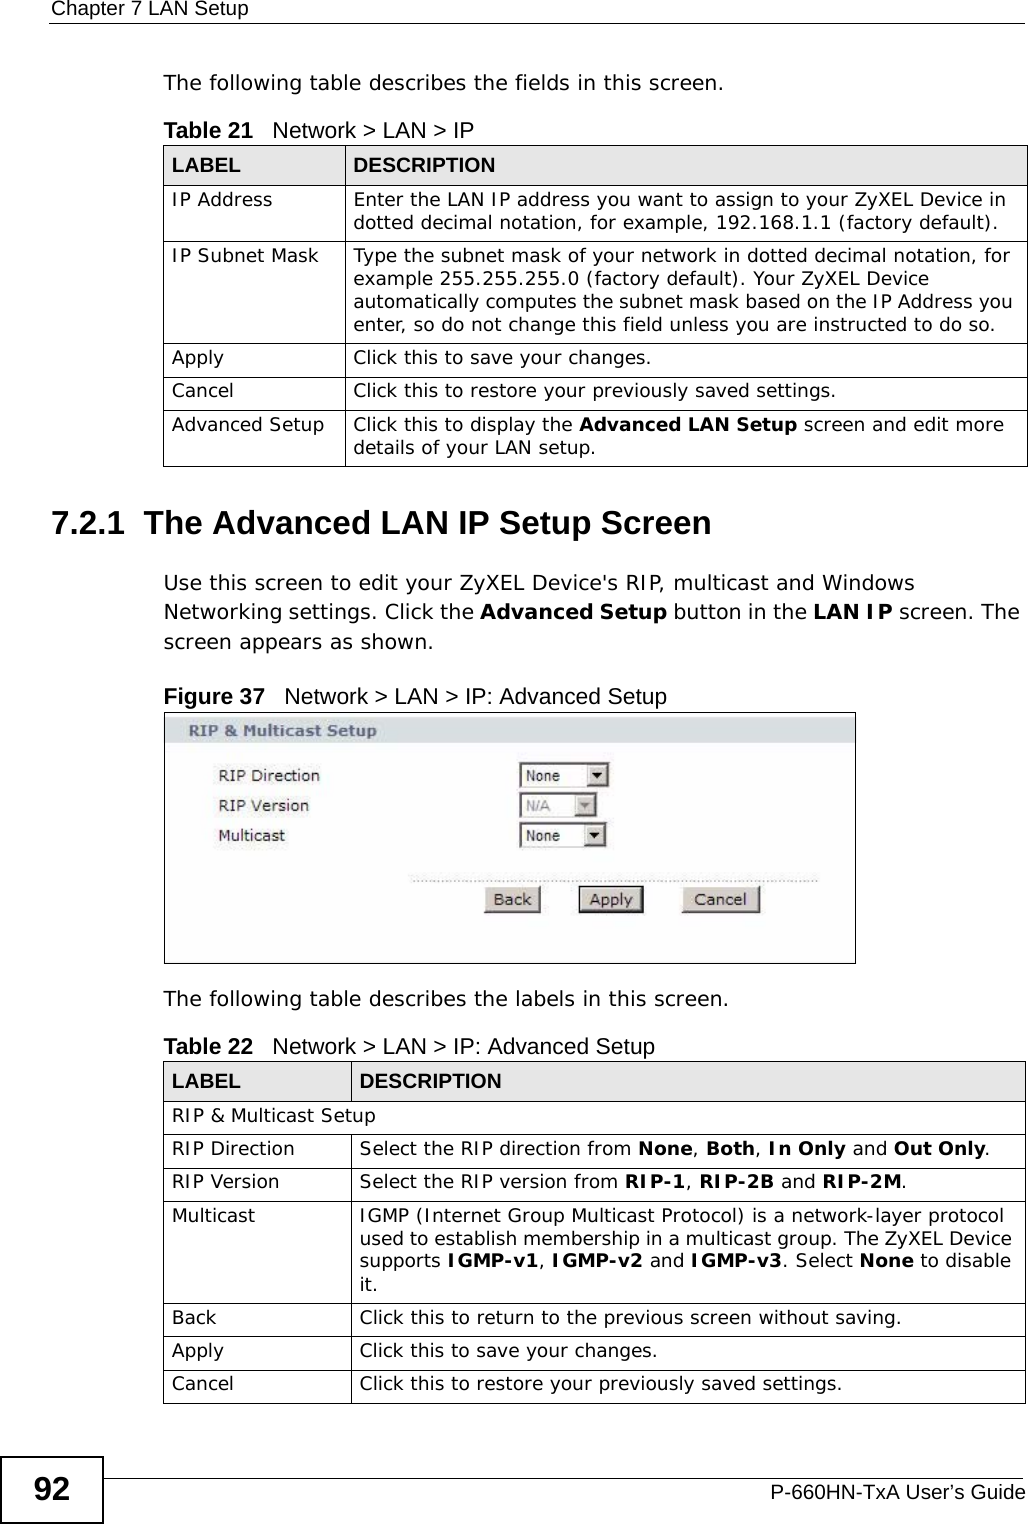 Chapter 7 LAN SetupP-660HN-TxA User’s Guide92The following table describes the fields in this screen.  7.2.1  The Advanced LAN IP Setup Screen Use this screen to edit your ZyXEL Device&apos;s RIP, multicast and Windows Networking settings. Click the Advanced Setup button in the LAN IP screen. The screen appears as shown.Figure 37   Network &gt; LAN &gt; IP: Advanced SetupThe following table describes the labels in this screen.  Table 21   Network &gt; LAN &gt; IPLABEL DESCRIPTIONIP Address Enter the LAN IP address you want to assign to your ZyXEL Device in dotted decimal notation, for example, 192.168.1.1 (factory default). IP Subnet Mask  Type the subnet mask of your network in dotted decimal notation, for example 255.255.255.0 (factory default). Your ZyXEL Device automatically computes the subnet mask based on the IP Address you enter, so do not change this field unless you are instructed to do so.Apply Click this to save your changes.Cancel Click this to restore your previously saved settings.Advanced Setup Click this to display the Advanced LAN Setup screen and edit more details of your LAN setup.Table 22   Network &gt; LAN &gt; IP: Advanced SetupLABEL DESCRIPTIONRIP &amp; Multicast SetupRIP Direction Select the RIP direction from None, Both, In Only and Out Only.RIP Version Select the RIP version from RIP-1, RIP-2B and RIP-2M.Multicast IGMP (Internet Group Multicast Protocol) is a network-layer protocol used to establish membership in a multicast group. The ZyXEL Device supports IGMP-v1, IGMP-v2 and IGMP-v3. Select None to disable it.Back Click this to return to the previous screen without saving.Apply Click this to save your changes.Cancel Click this to restore your previously saved settings.